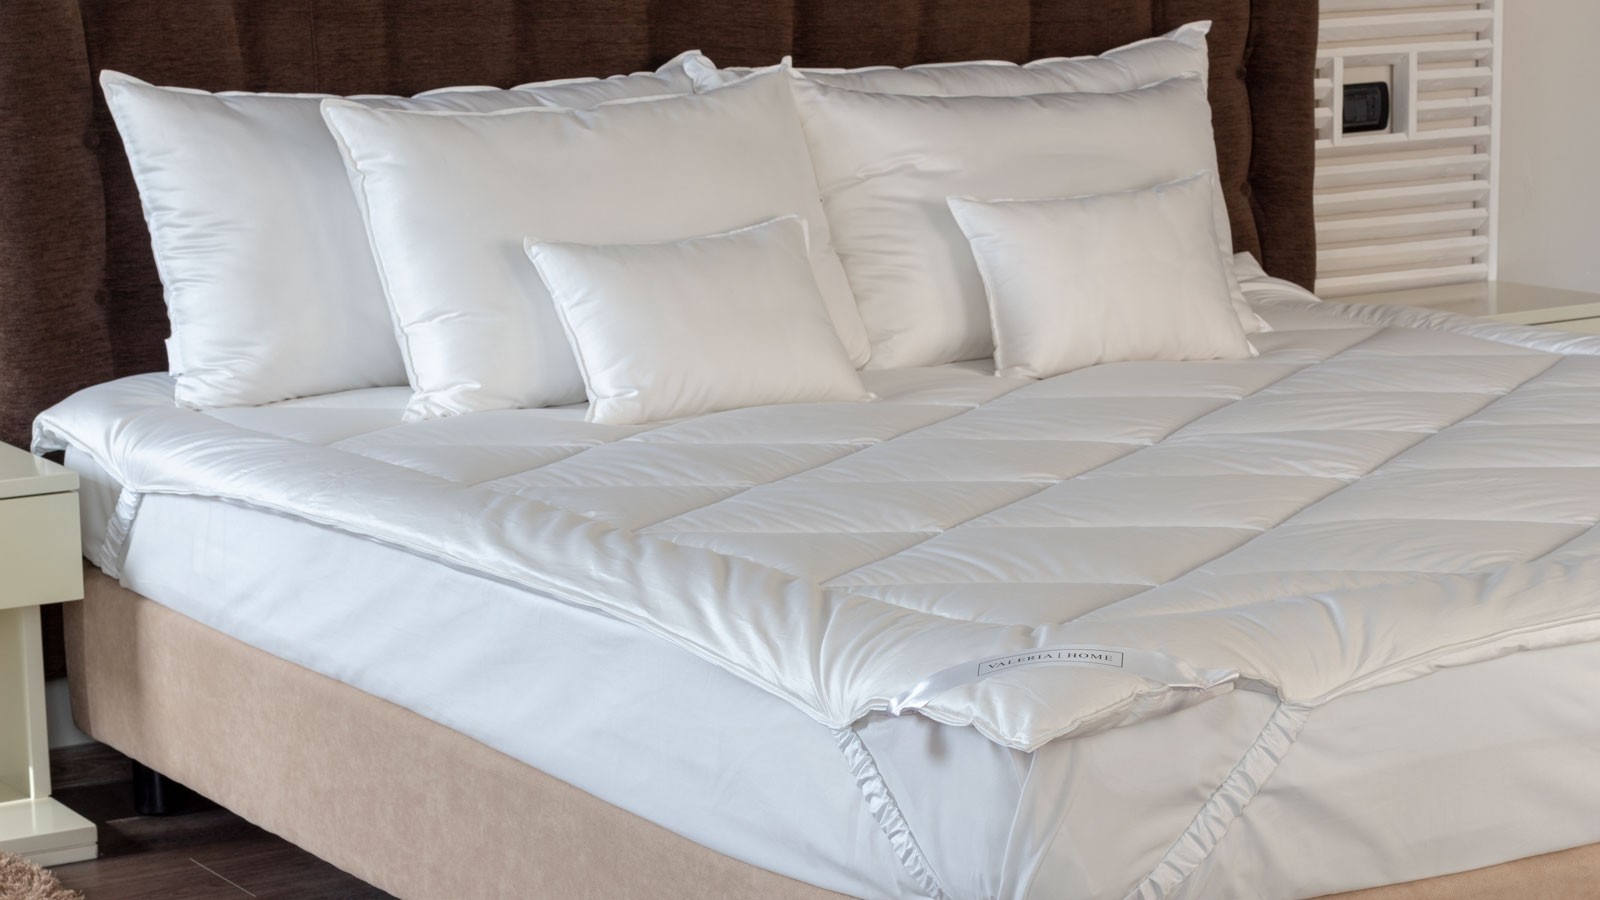 Which Mattress Protector Is Best?